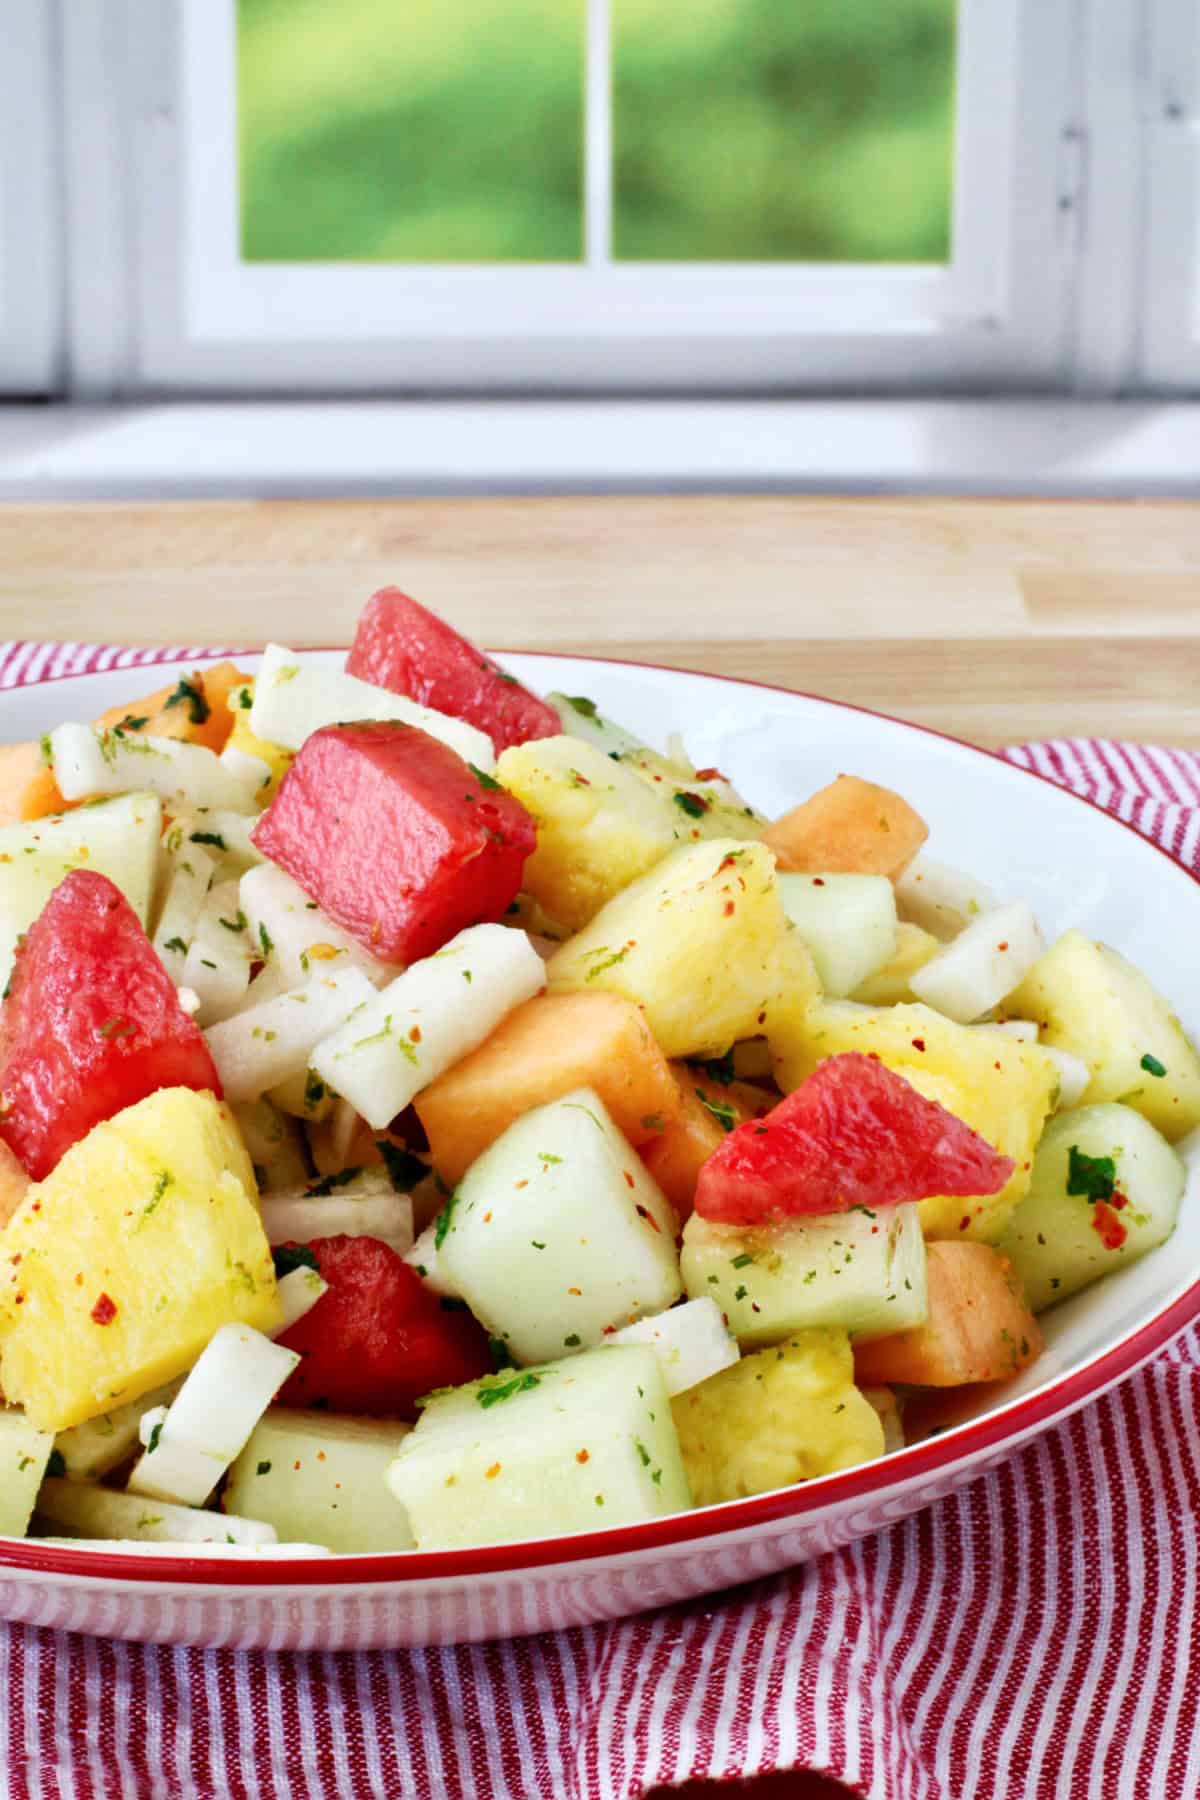 Melon, Jicama, and Pineapple Salad in a red-rimmed bowl.